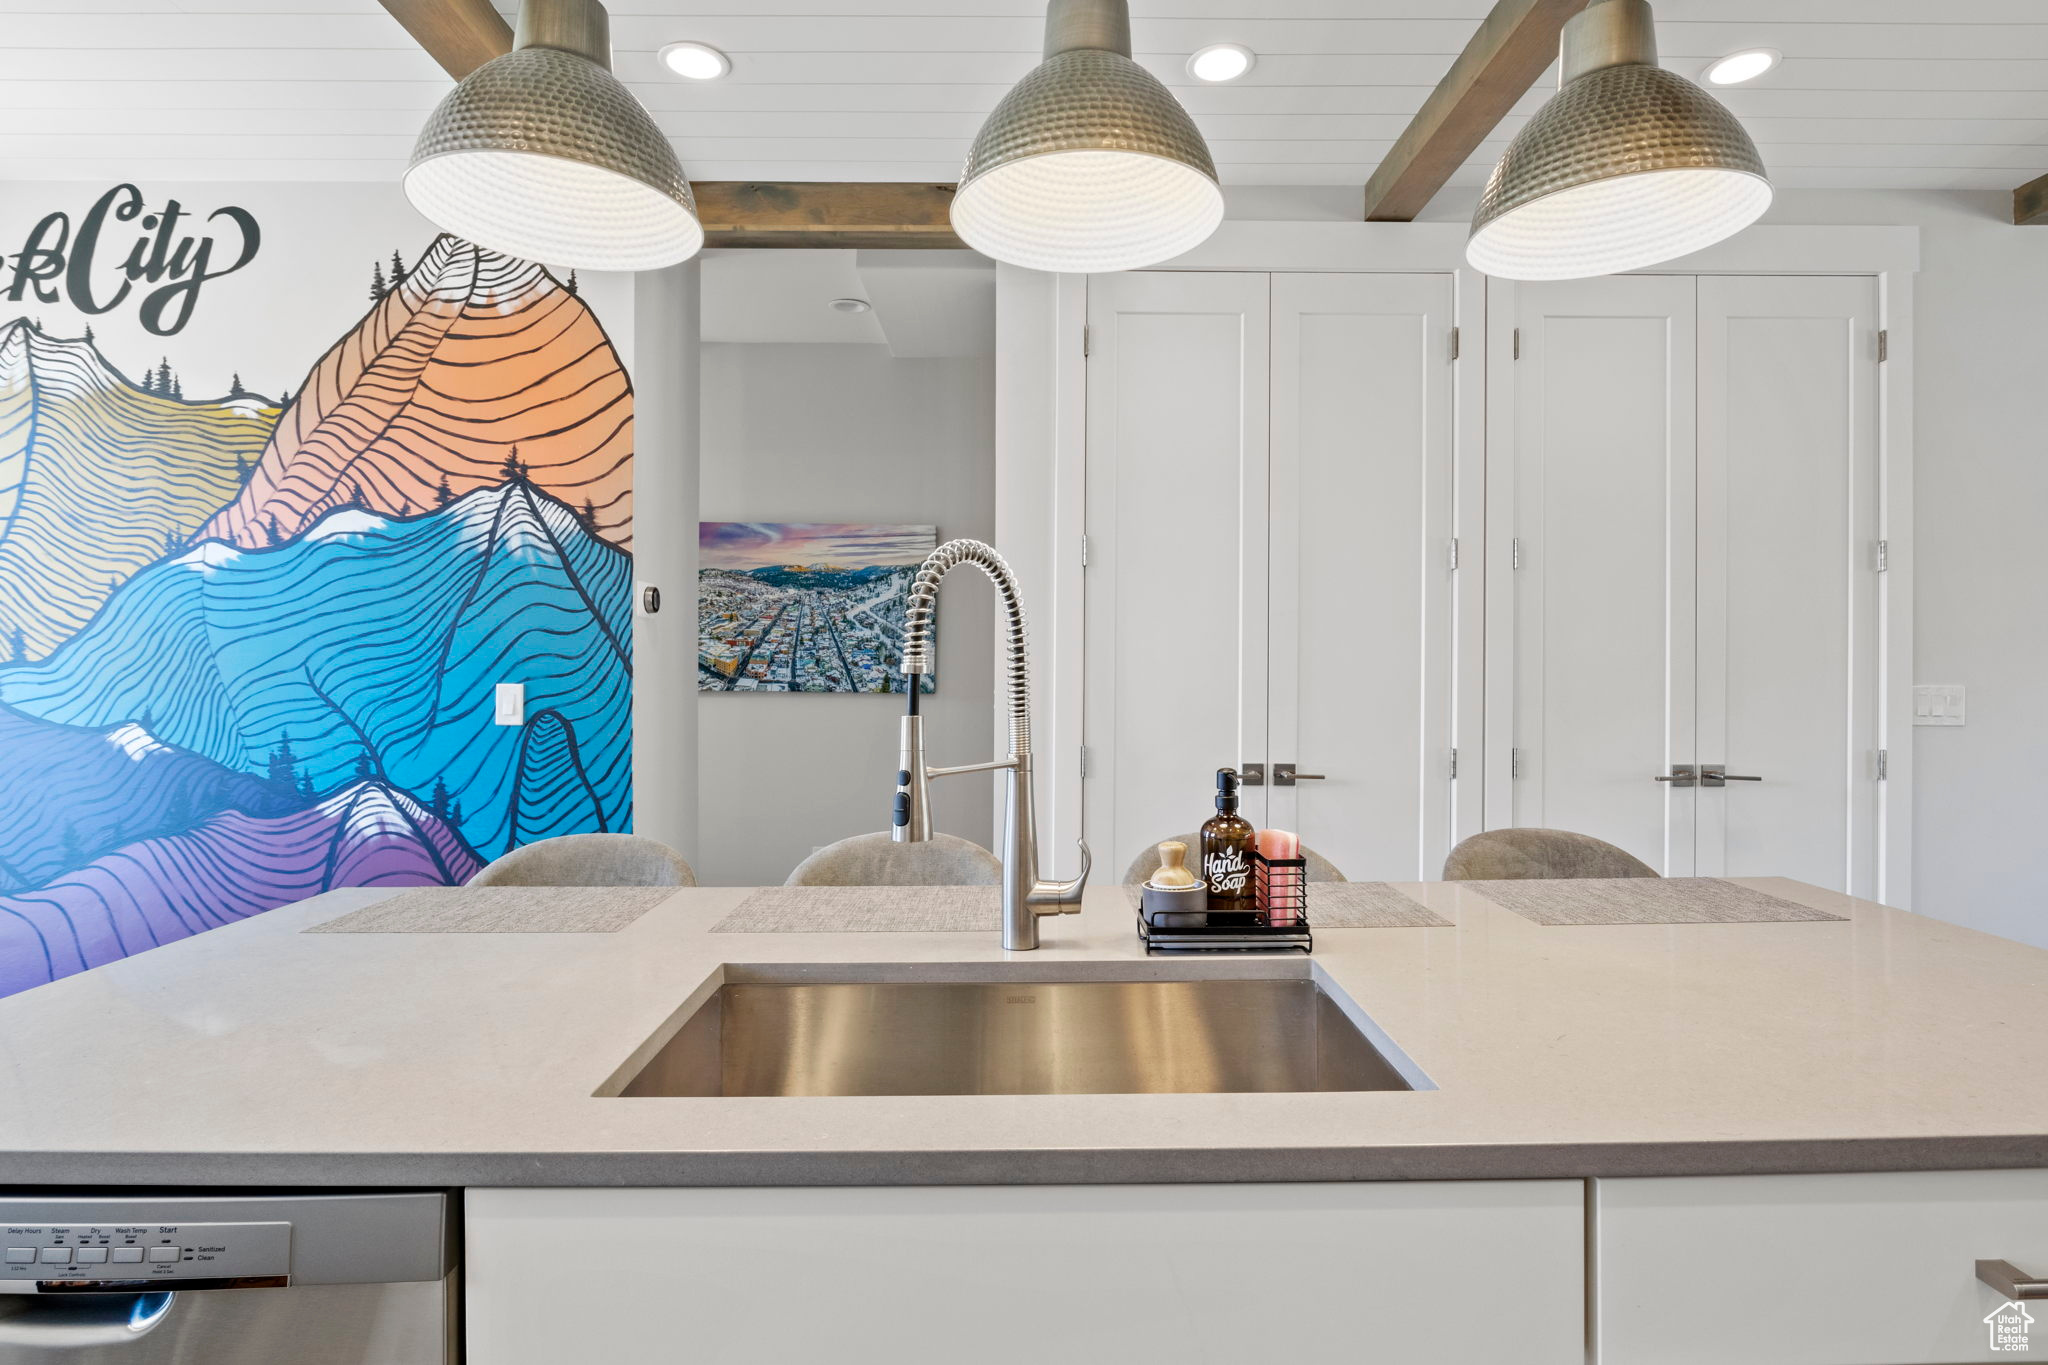 Kitchen featuring a center island, white cabinetry, beam ceiling, sink, and dishwasher